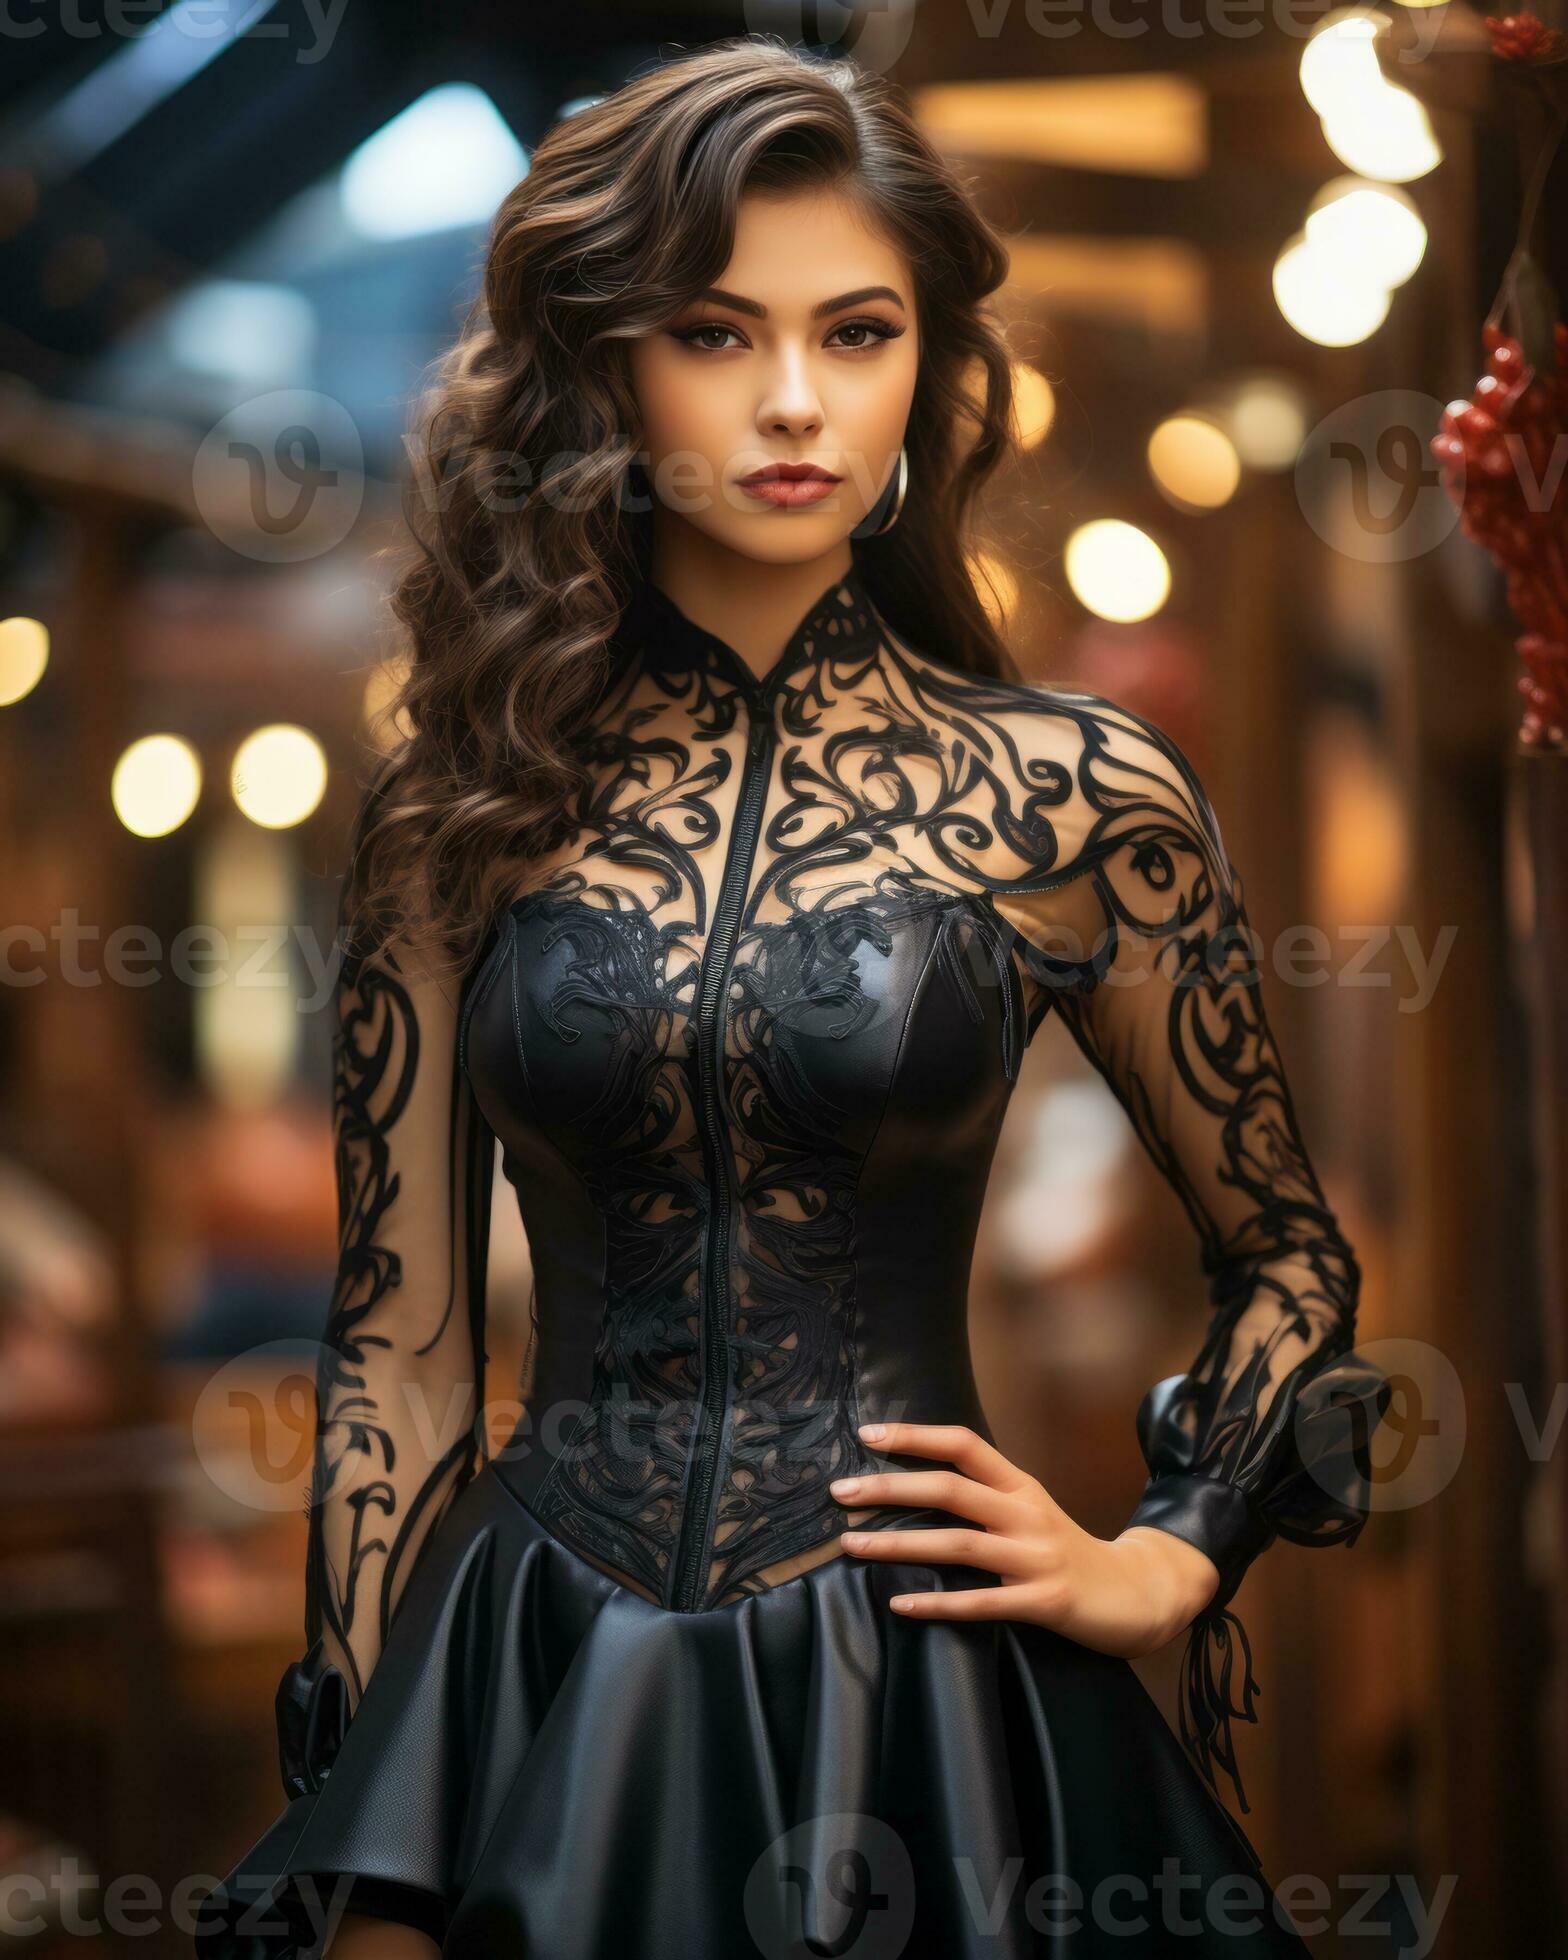 A gothic lady, adorned in a stunning black dress and corset